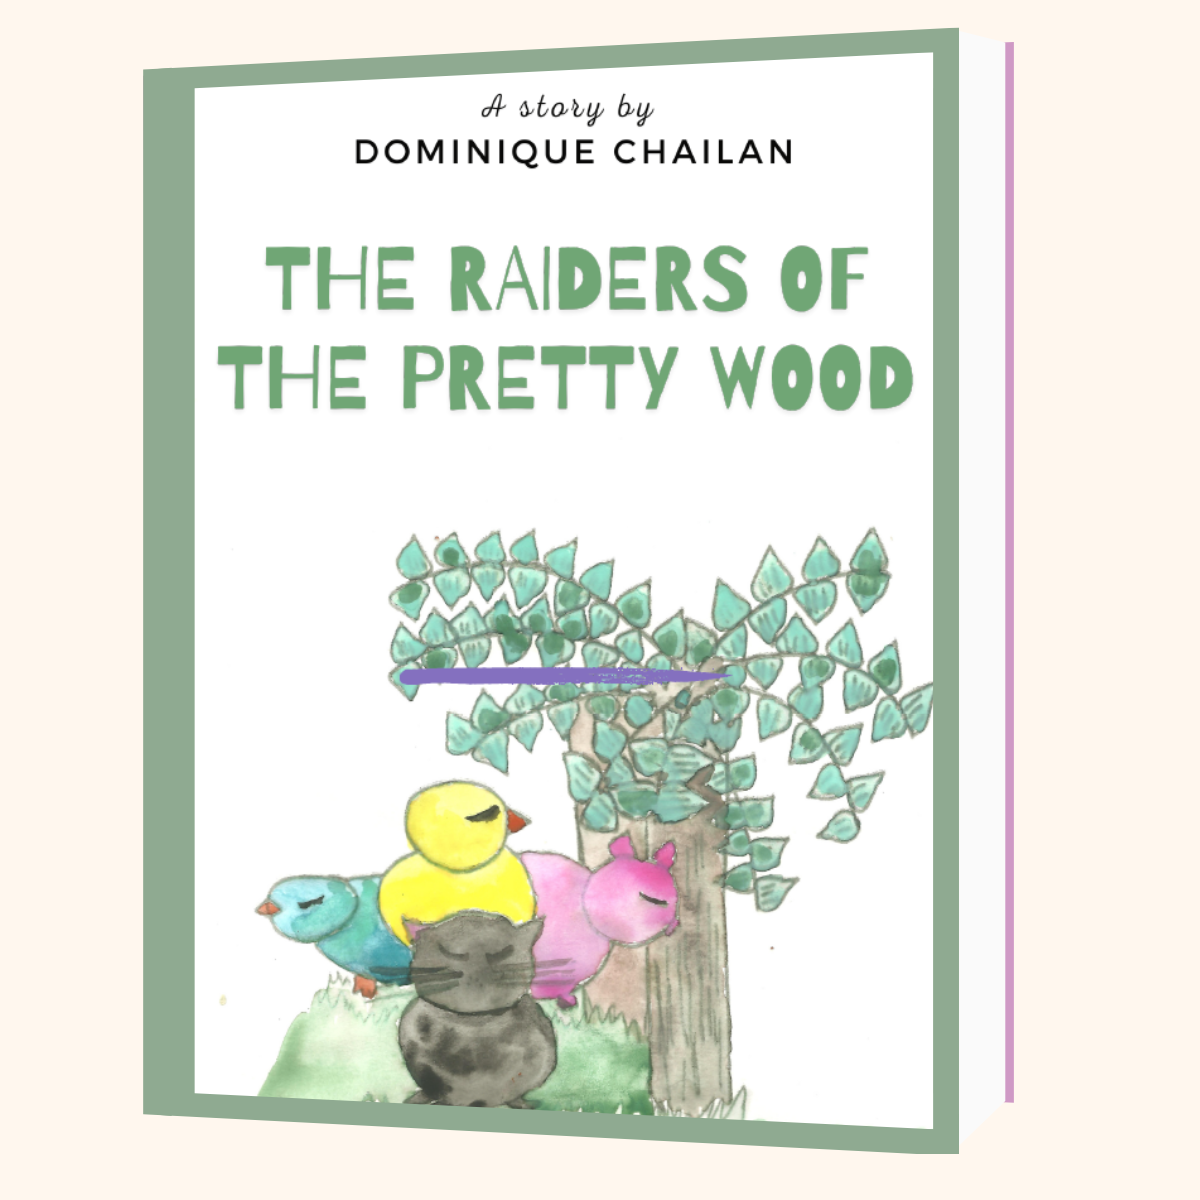 The raiders of the pretty wood